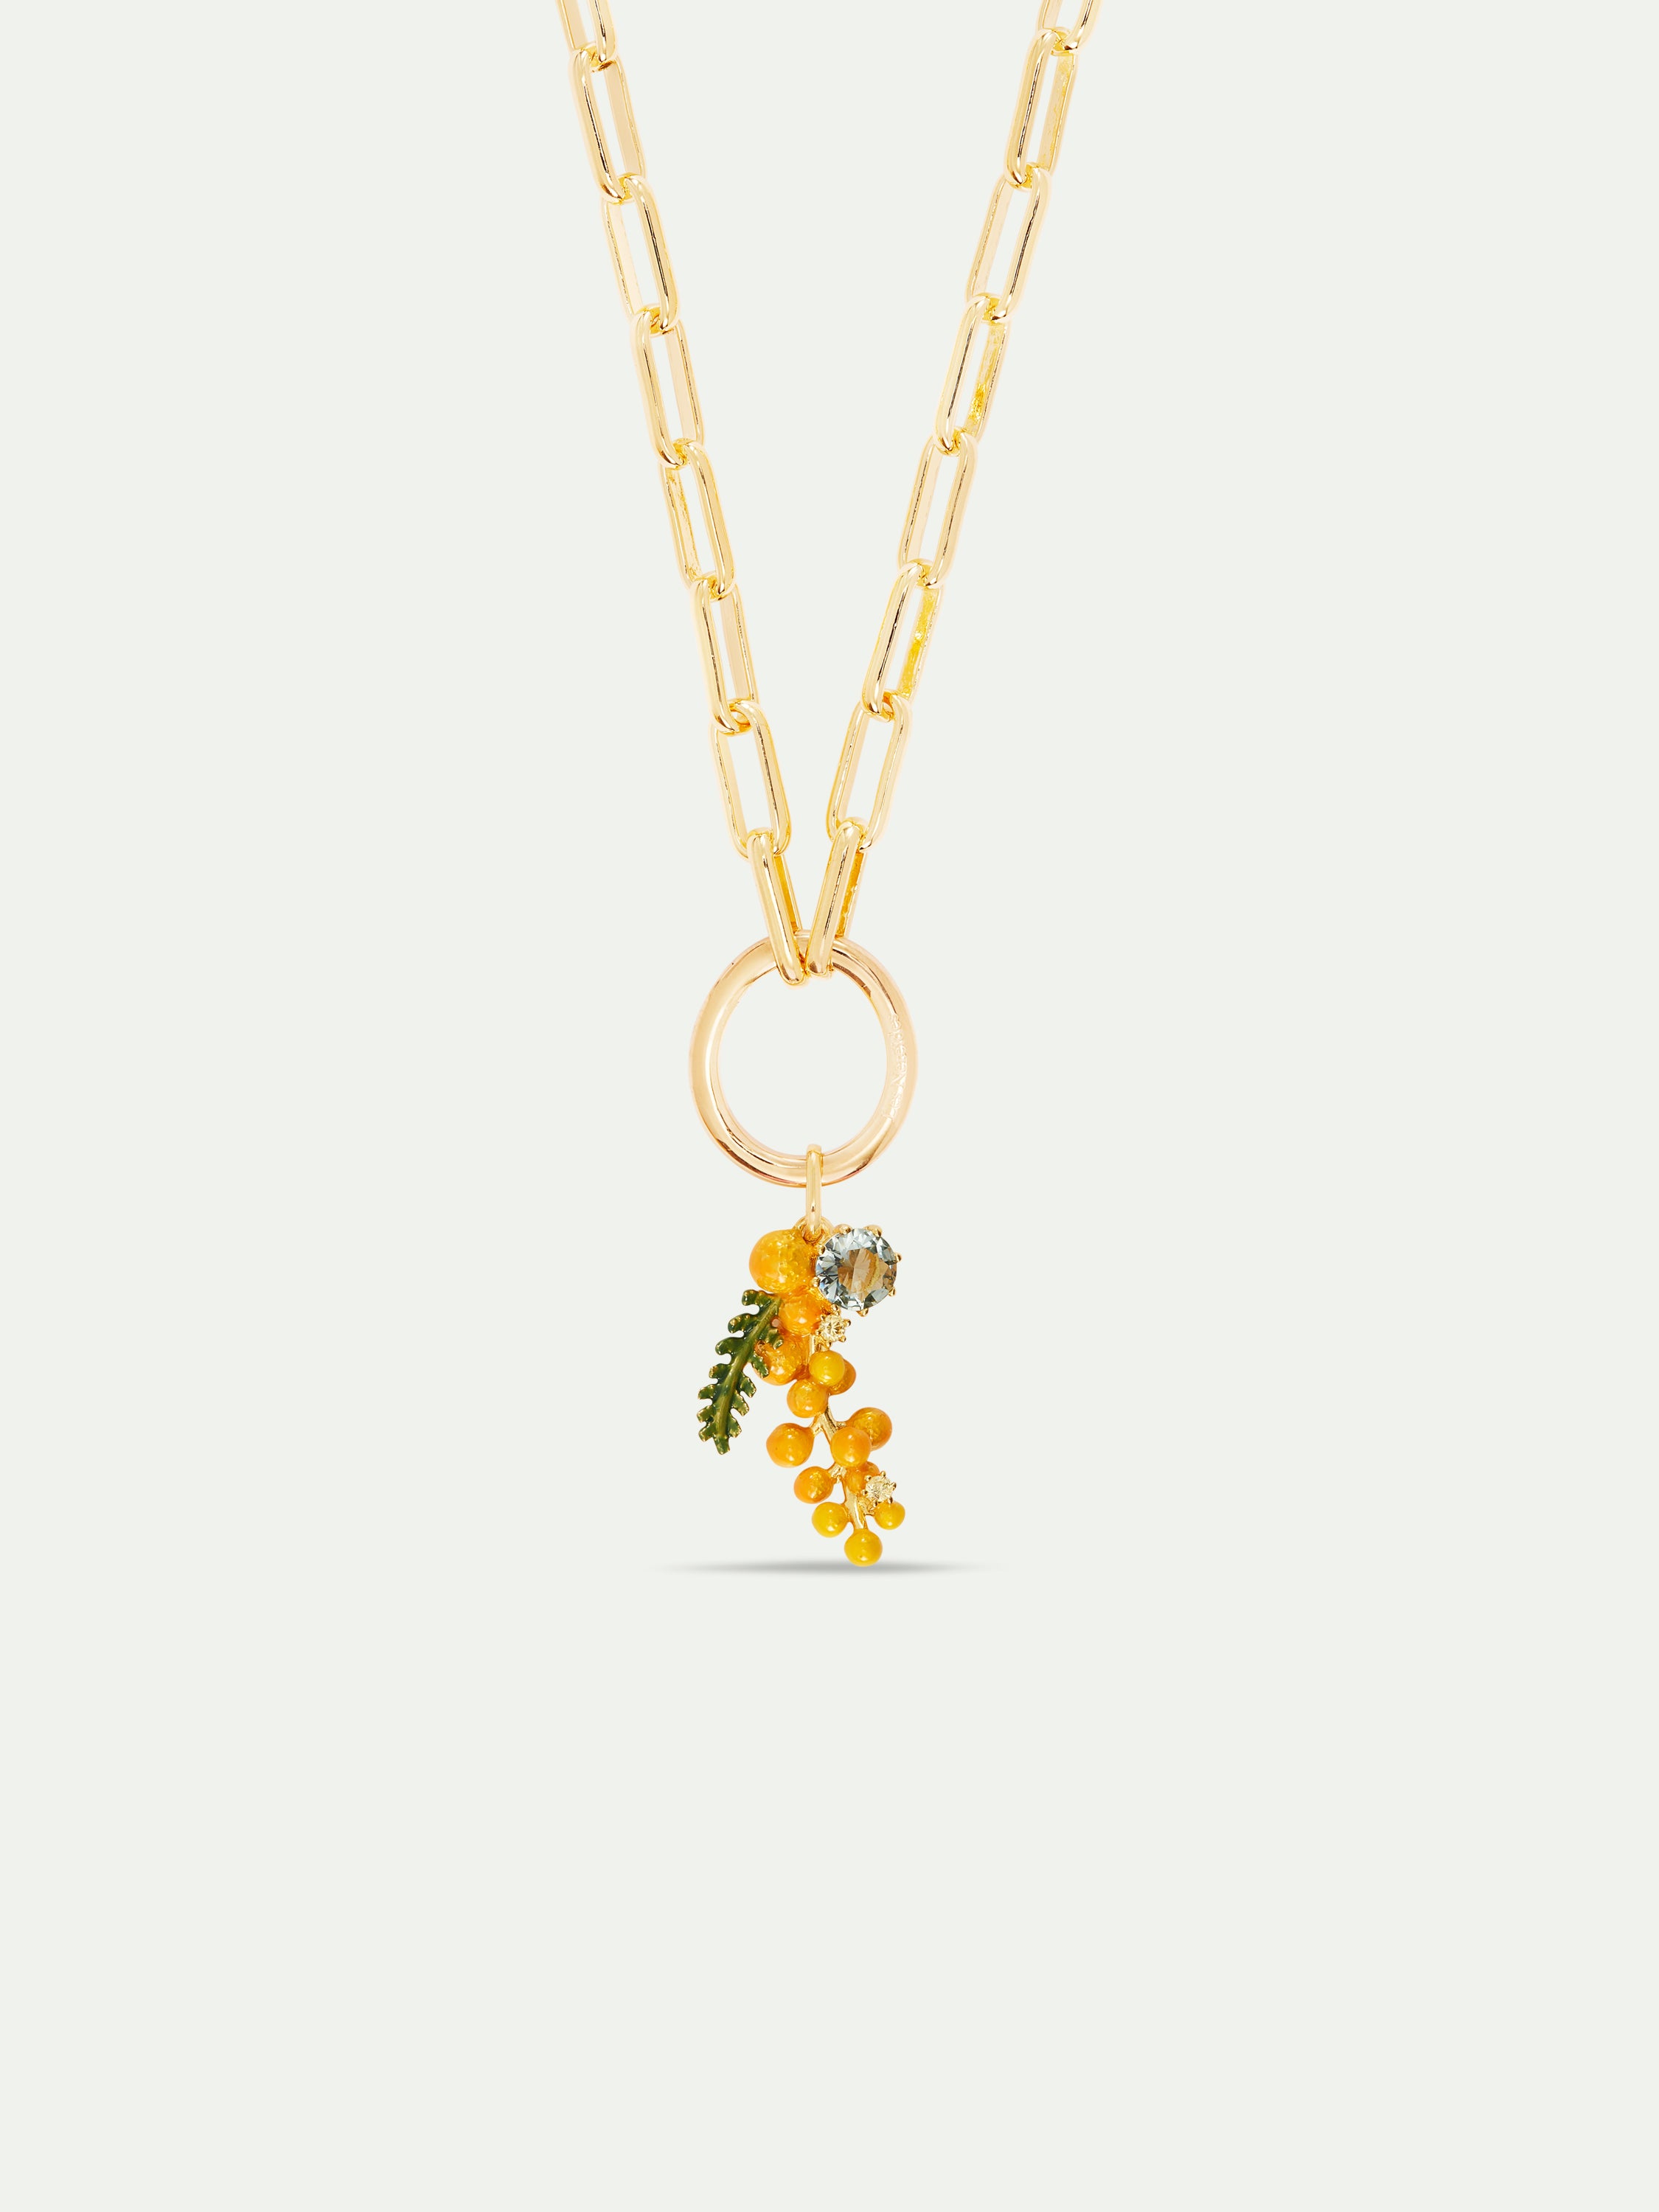 Mimosa and faceted glass pendant: Delicacy and Renewal